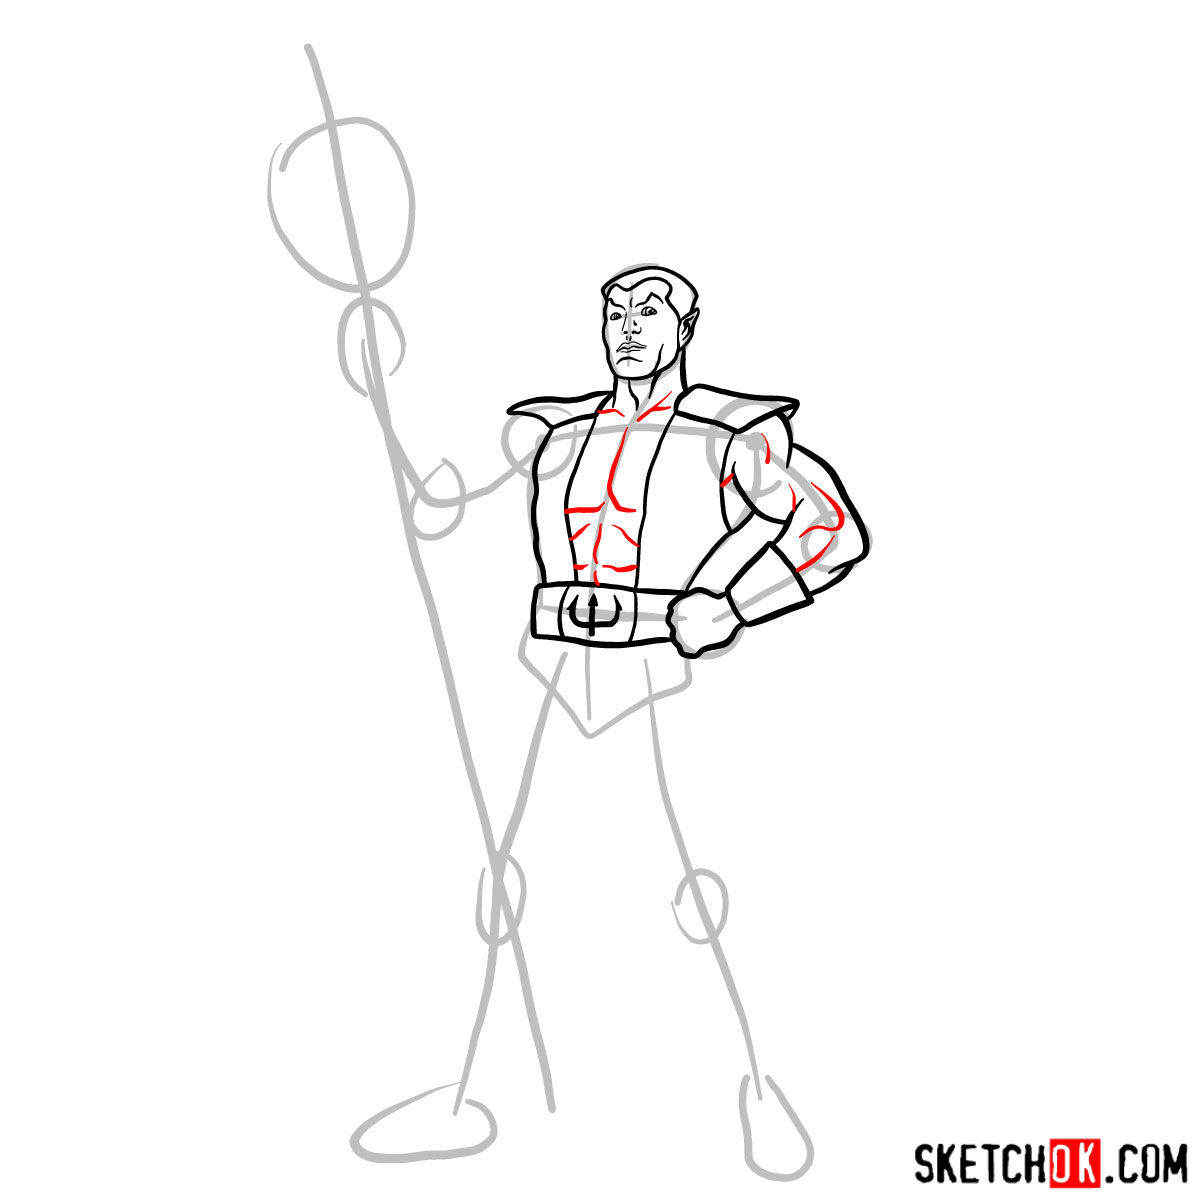 How to draw Namor the Sub-Mariner from Marvel Comics - step 09